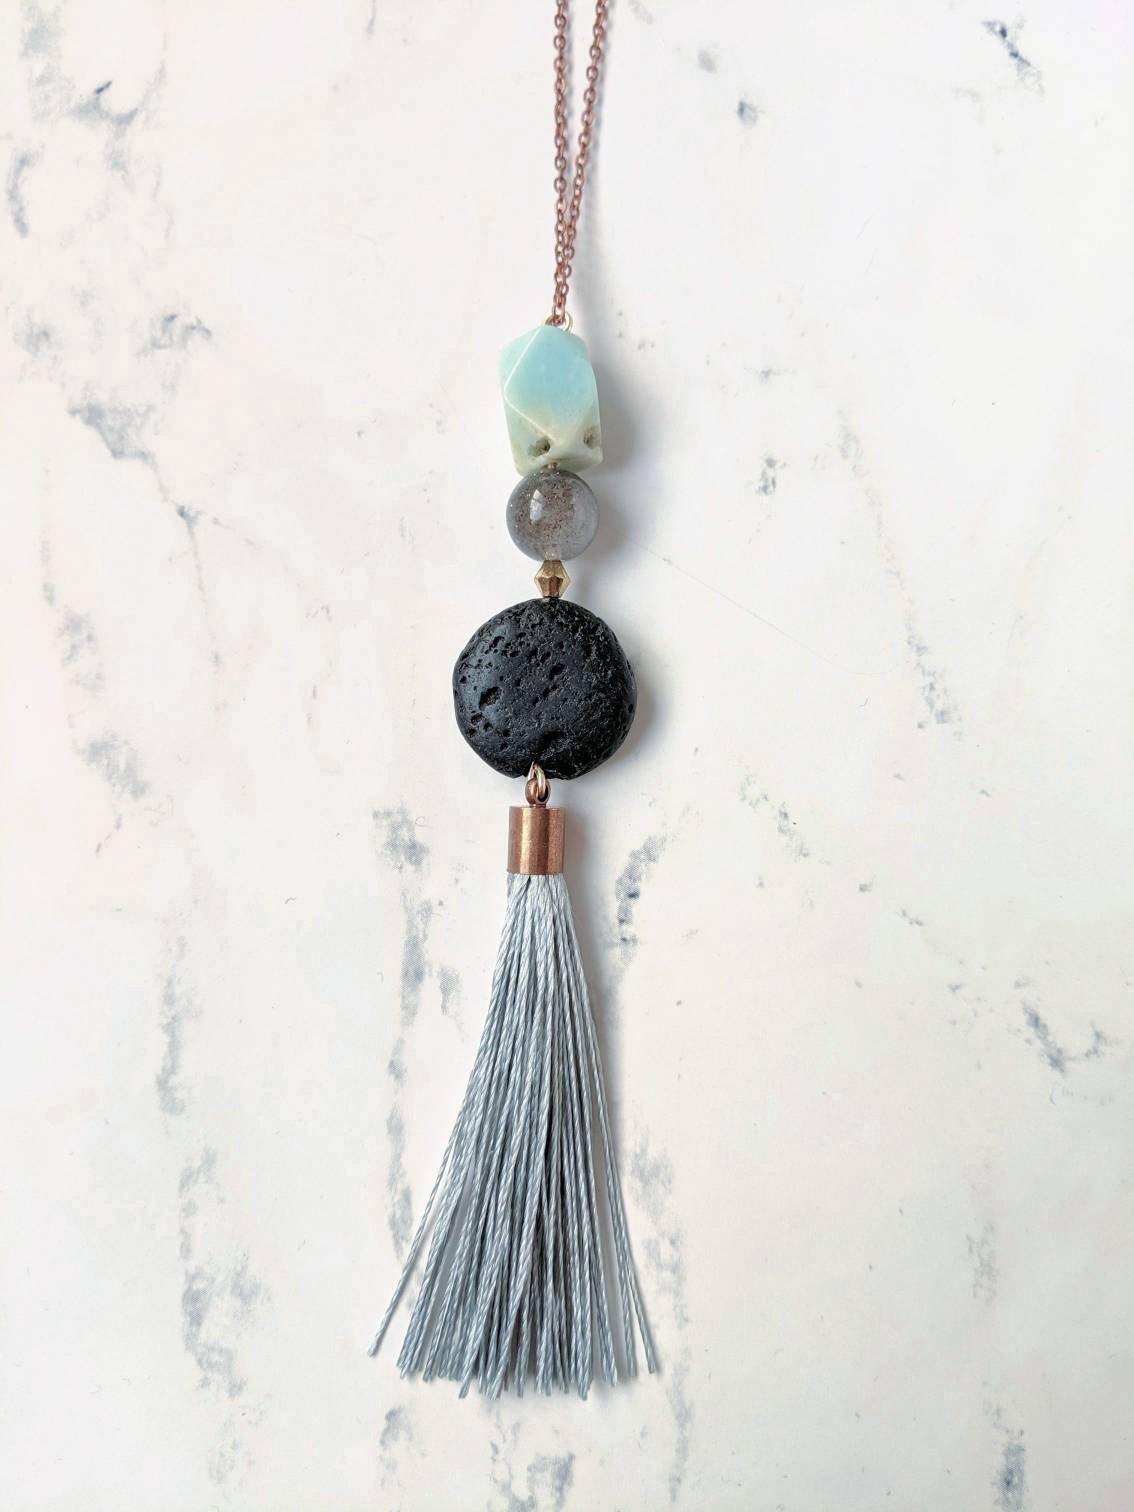 Tassel Diffuser Necklace with Amazonite & Jade